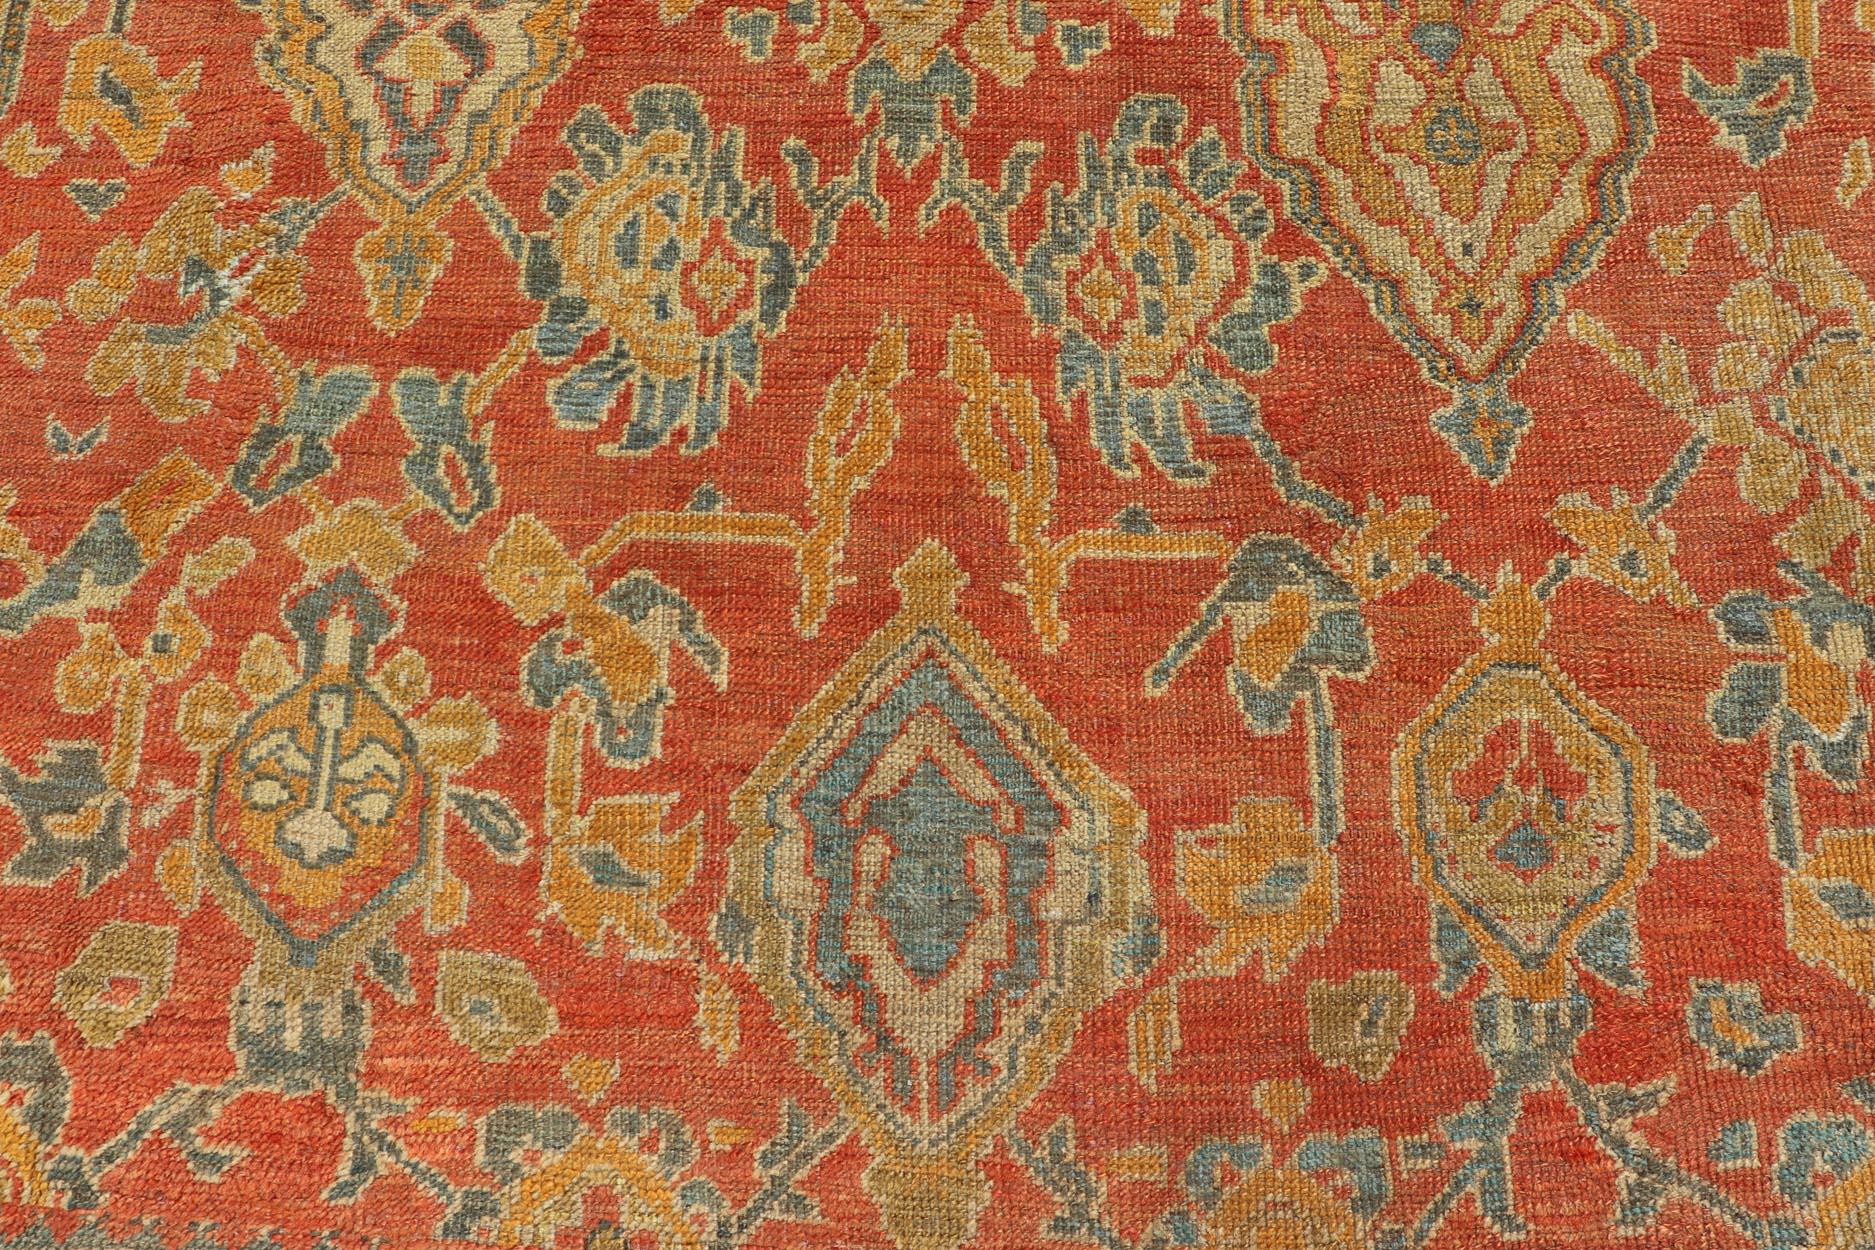 Antique Turkish Oushak Rug in Terracotta With All-Over Flower, Leaves and Vines  For Sale 2